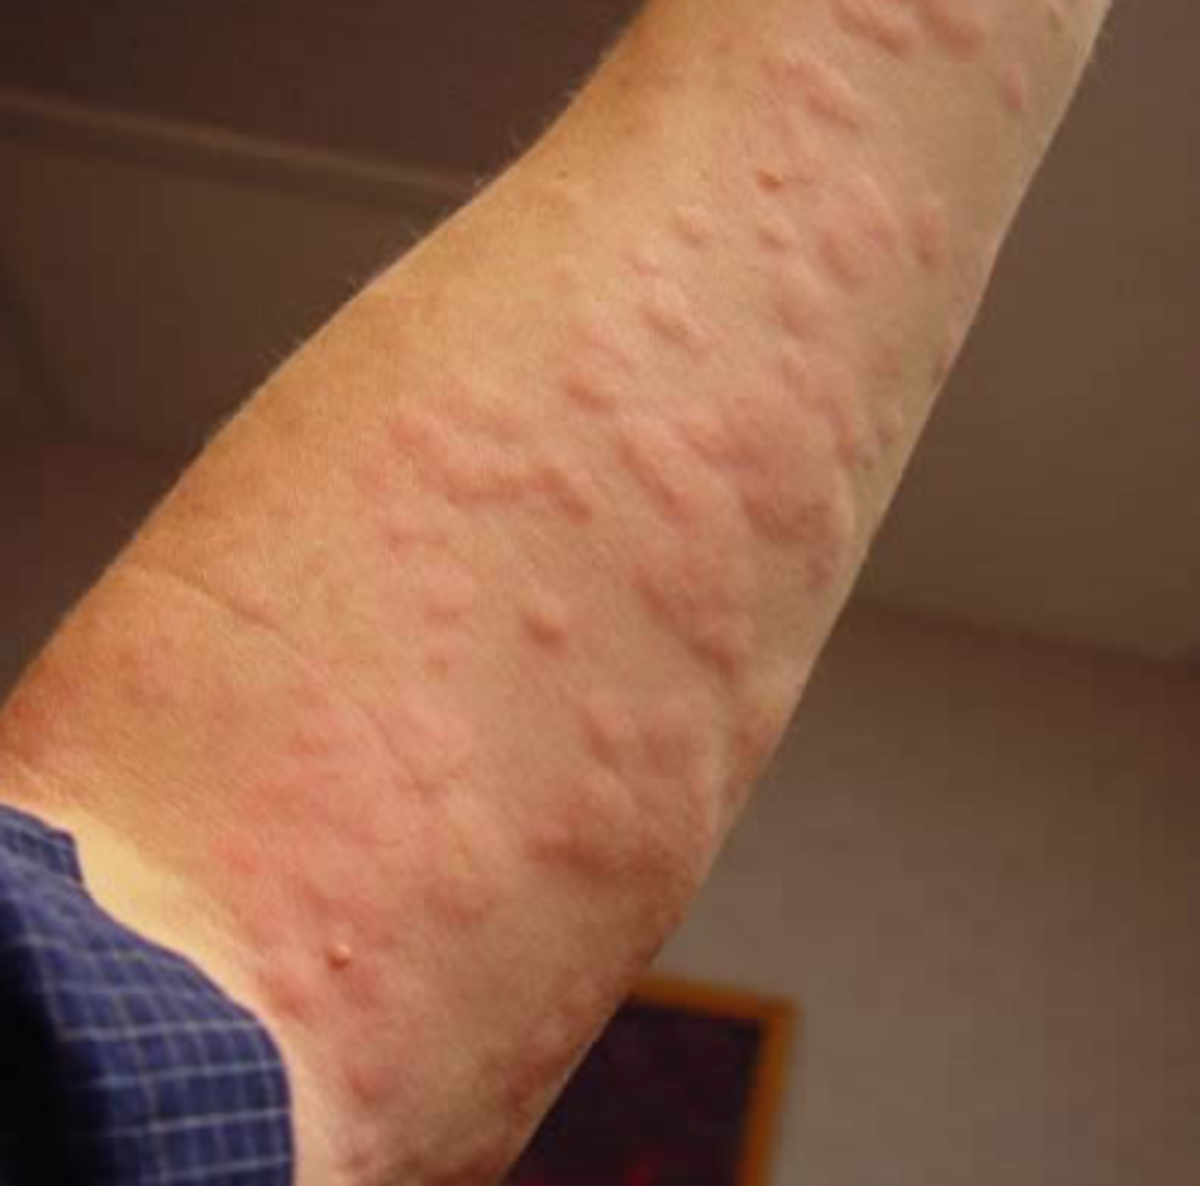 relief-from-hives-urticaria-and-eczema-rashes-in-under-one-minute-naturally